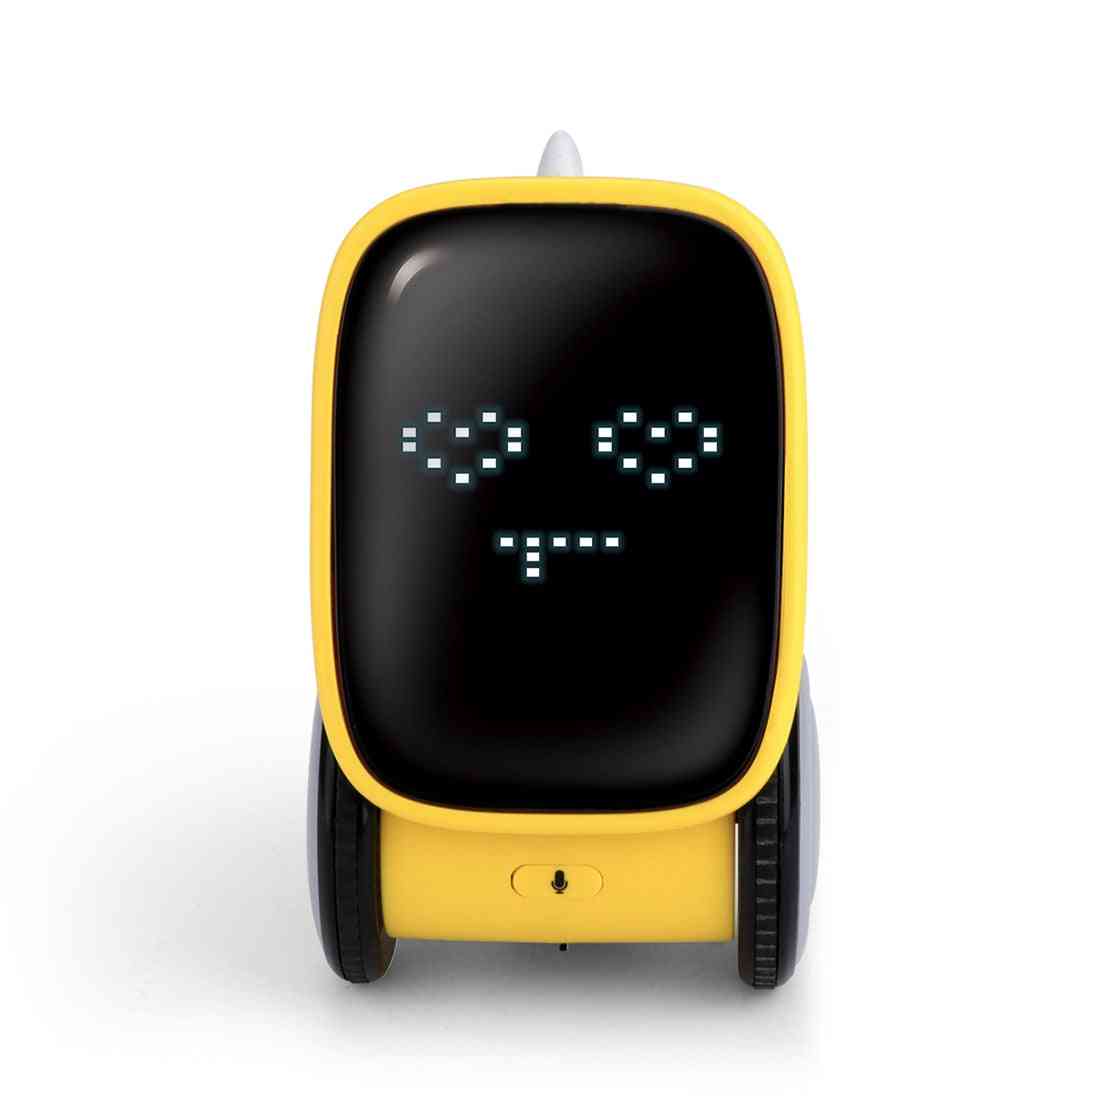 Smart Interactive Robot With Gesture Control, Touch Sensor And Voice Recording